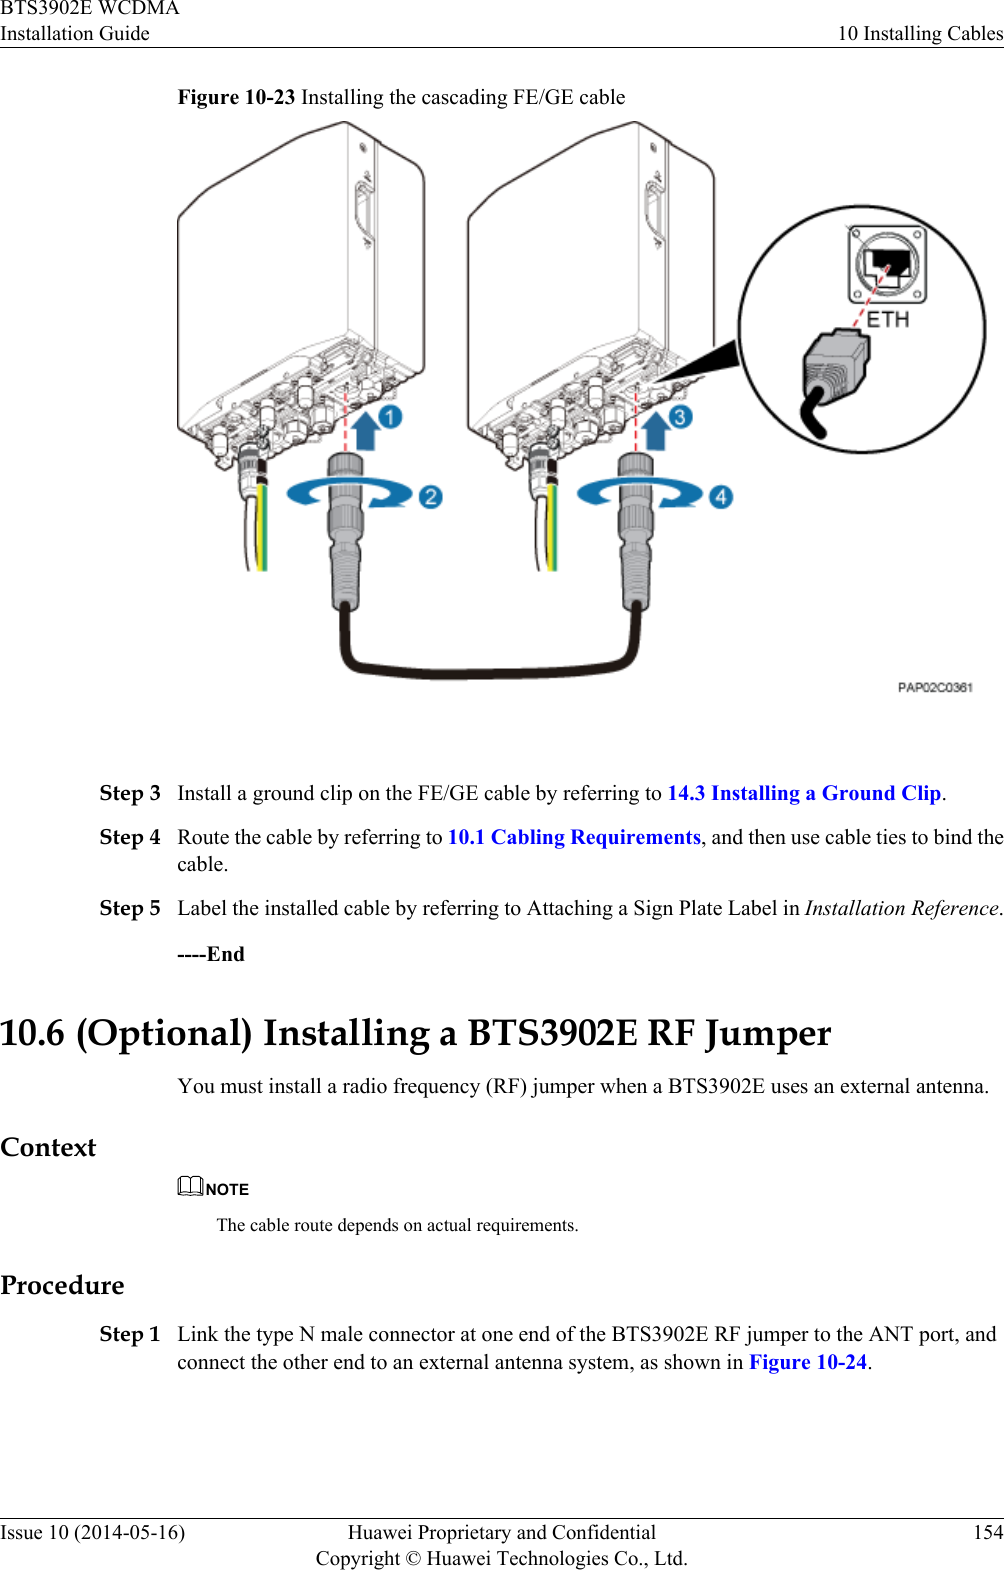 Figure 10-23 Installing the cascading FE/GE cable Step 3 Install a ground clip on the FE/GE cable by referring to 14.3 Installing a Ground Clip.Step 4 Route the cable by referring to 10.1 Cabling Requirements, and then use cable ties to bind thecable.Step 5 Label the installed cable by referring to Attaching a Sign Plate Label in Installation Reference.----End10.6 (Optional) Installing a BTS3902E RF JumperYou must install a radio frequency (RF) jumper when a BTS3902E uses an external antenna.ContextNOTEThe cable route depends on actual requirements.ProcedureStep 1 Link the type N male connector at one end of the BTS3902E RF jumper to the ANT port, andconnect the other end to an external antenna system, as shown in Figure 10-24.BTS3902E WCDMAInstallation Guide 10 Installing CablesIssue 10 (2014-05-16) Huawei Proprietary and ConfidentialCopyright © Huawei Technologies Co., Ltd.154